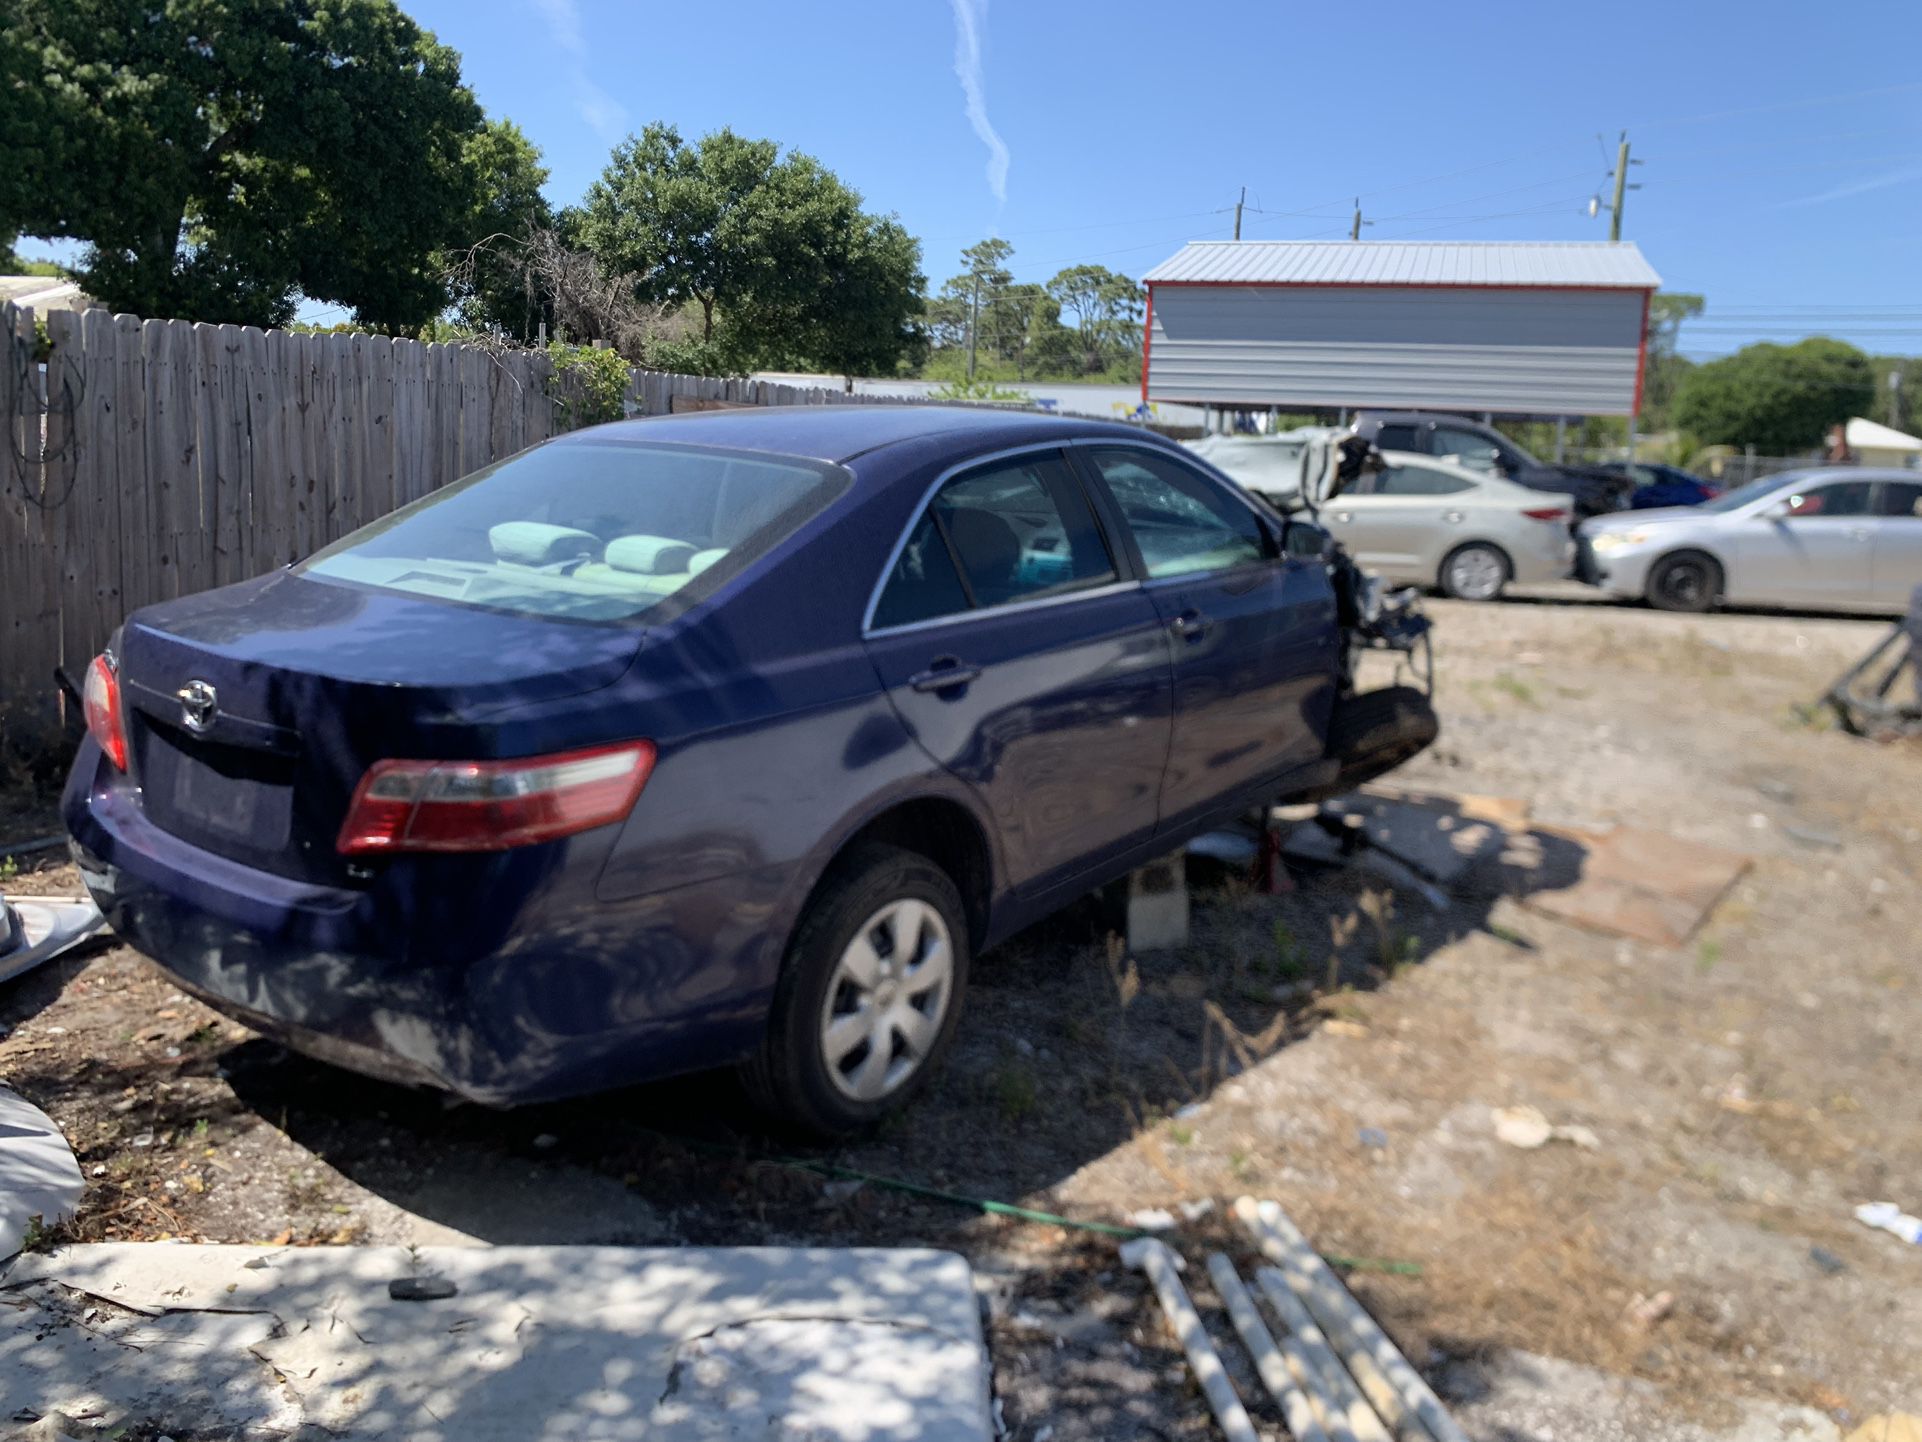 2009 Toyota Camry Parts Only 